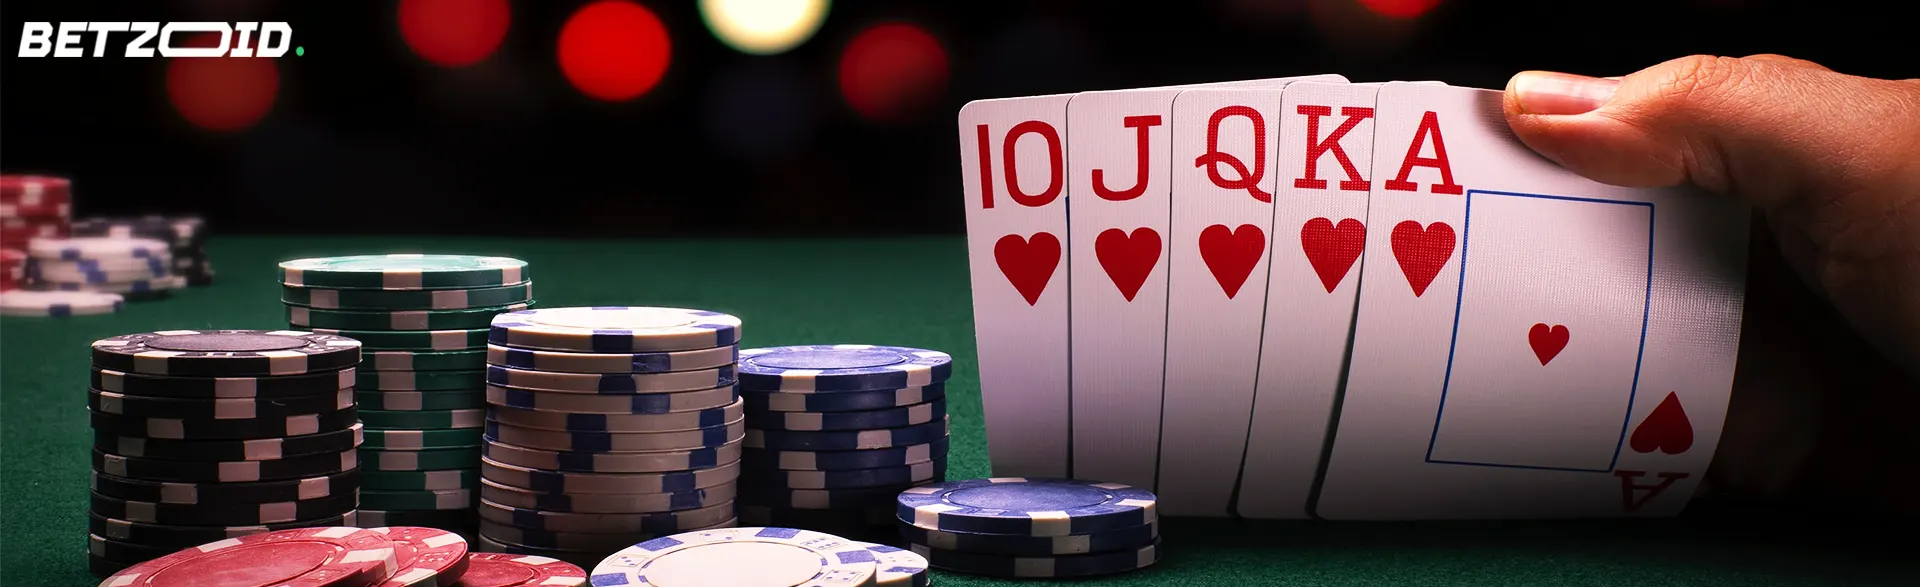 Royal flush in hearts and casino chips, enhancing the allure of a 400% match deposit bonus.